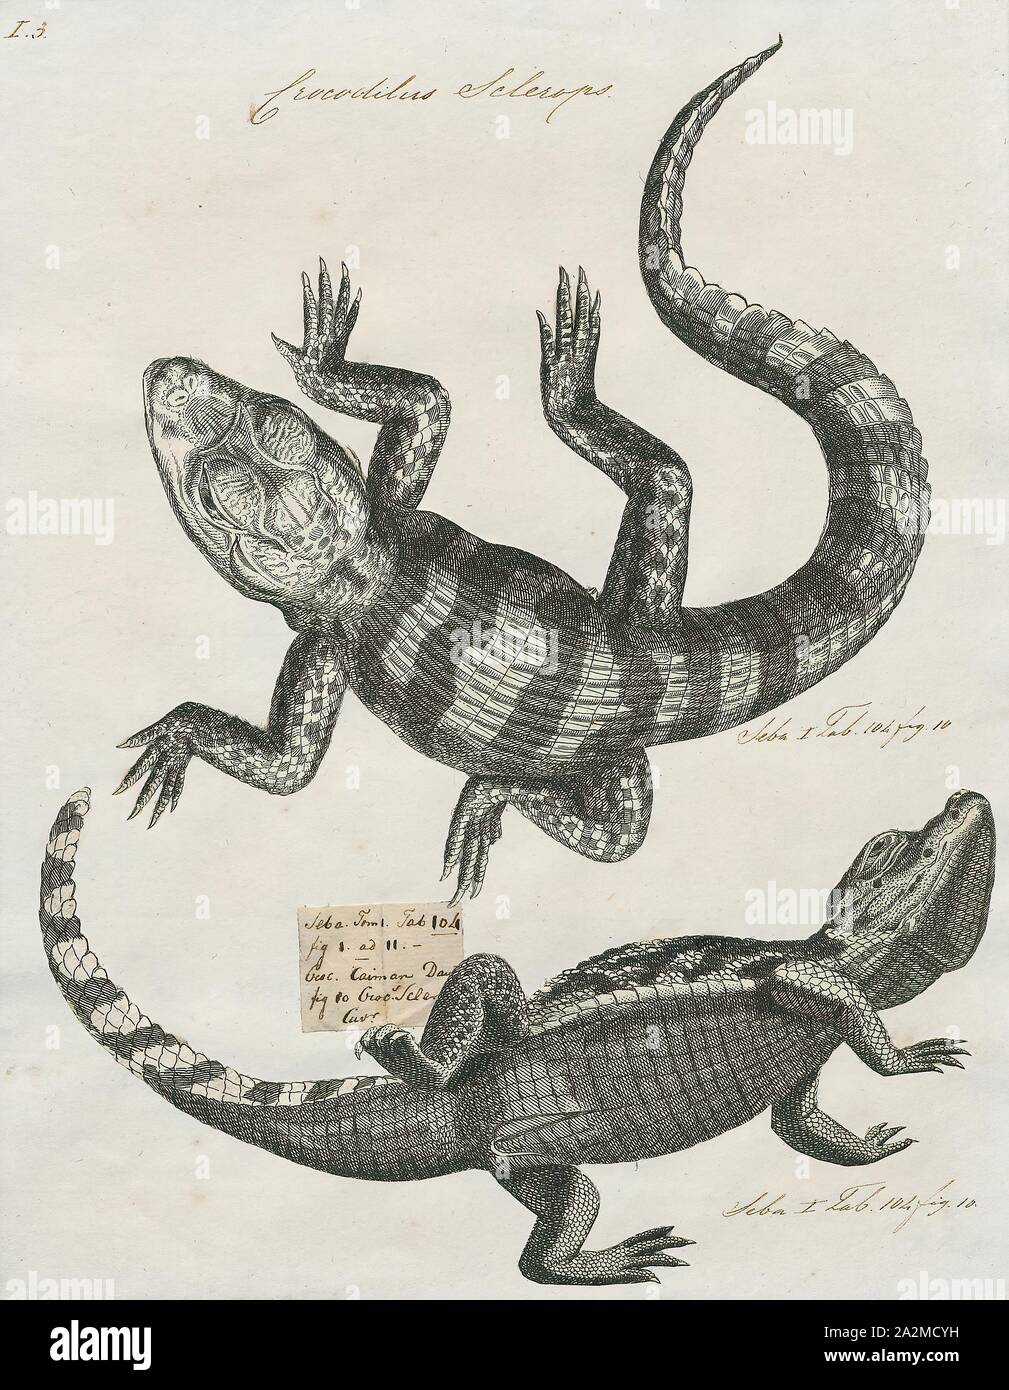 Crocodilus sclerops, Print, The spectacled caiman (Caiman crocodilus), also known as the white caiman, common caiman, and speckled caiman, is a crocodilian in the family Alligatoridae. It is brownish-, greenish-, or yellowish-gray colored and has a spectacle-like ridge between its eyes, which is where its common name come from. It grows to a length of 1.4–2.5 metres (4.6–8.2 ft) and a weight of 7–40 kilograms (15–88 lb), with males being both longer and heavier than females. Its diet varies seasonally, commonly consisting of crabs, fish, mammals, and snails. Breeding occurs from May to August Stock Photo